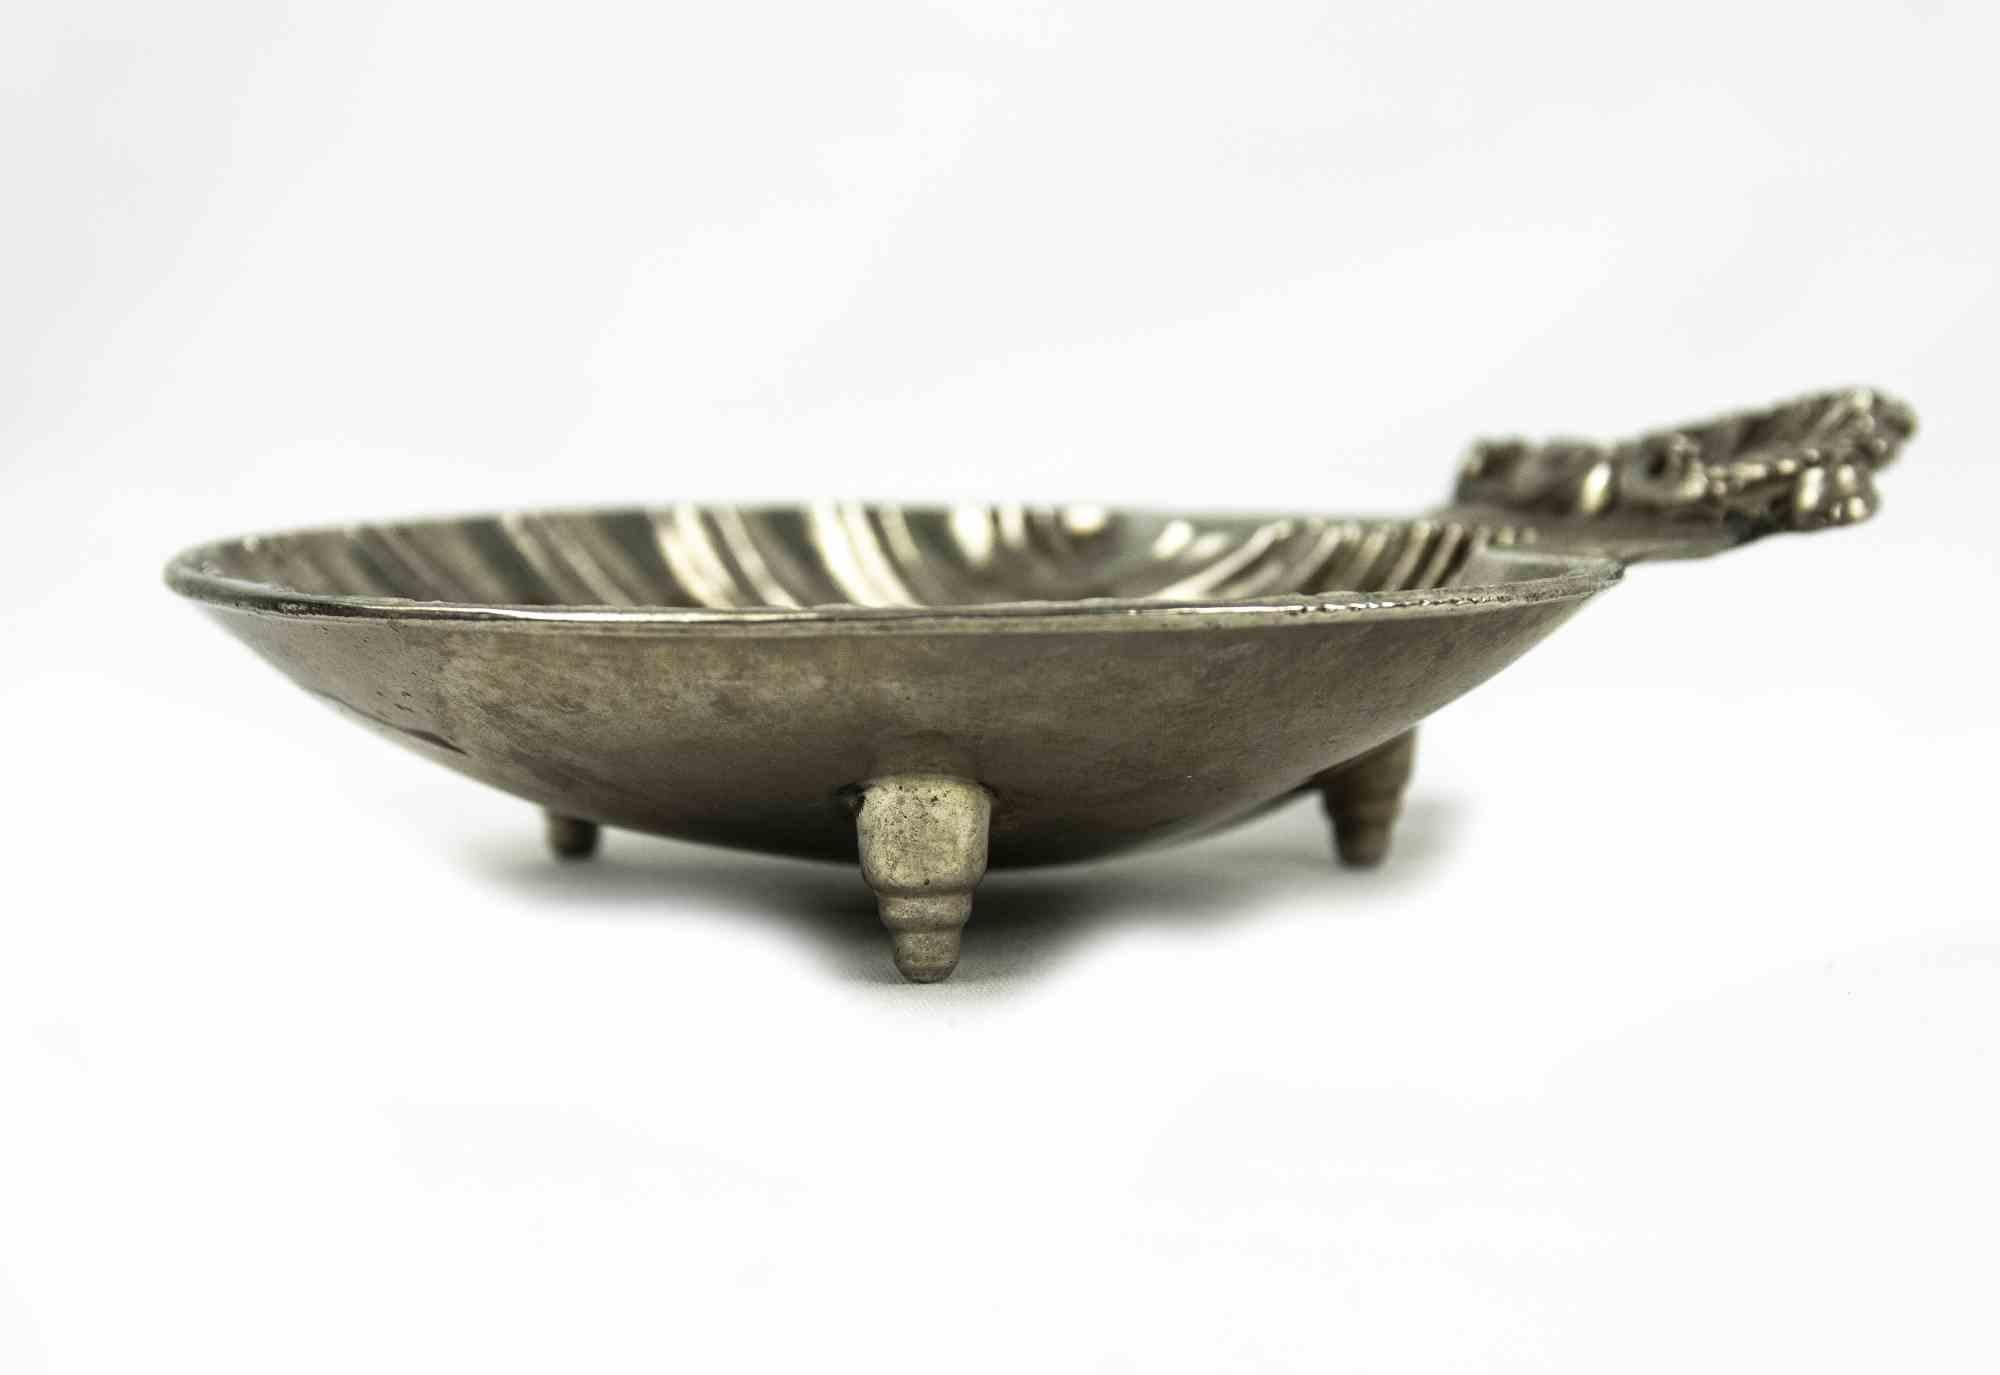 Shell shape vintage silver plated ashtray is an original decorative object realized in England in the 1970s.

Dimensions: 3 x 12.5 cm. 

Good Conditions. Some traces of ash are present.

The work reproduces an open shell valve and the handle